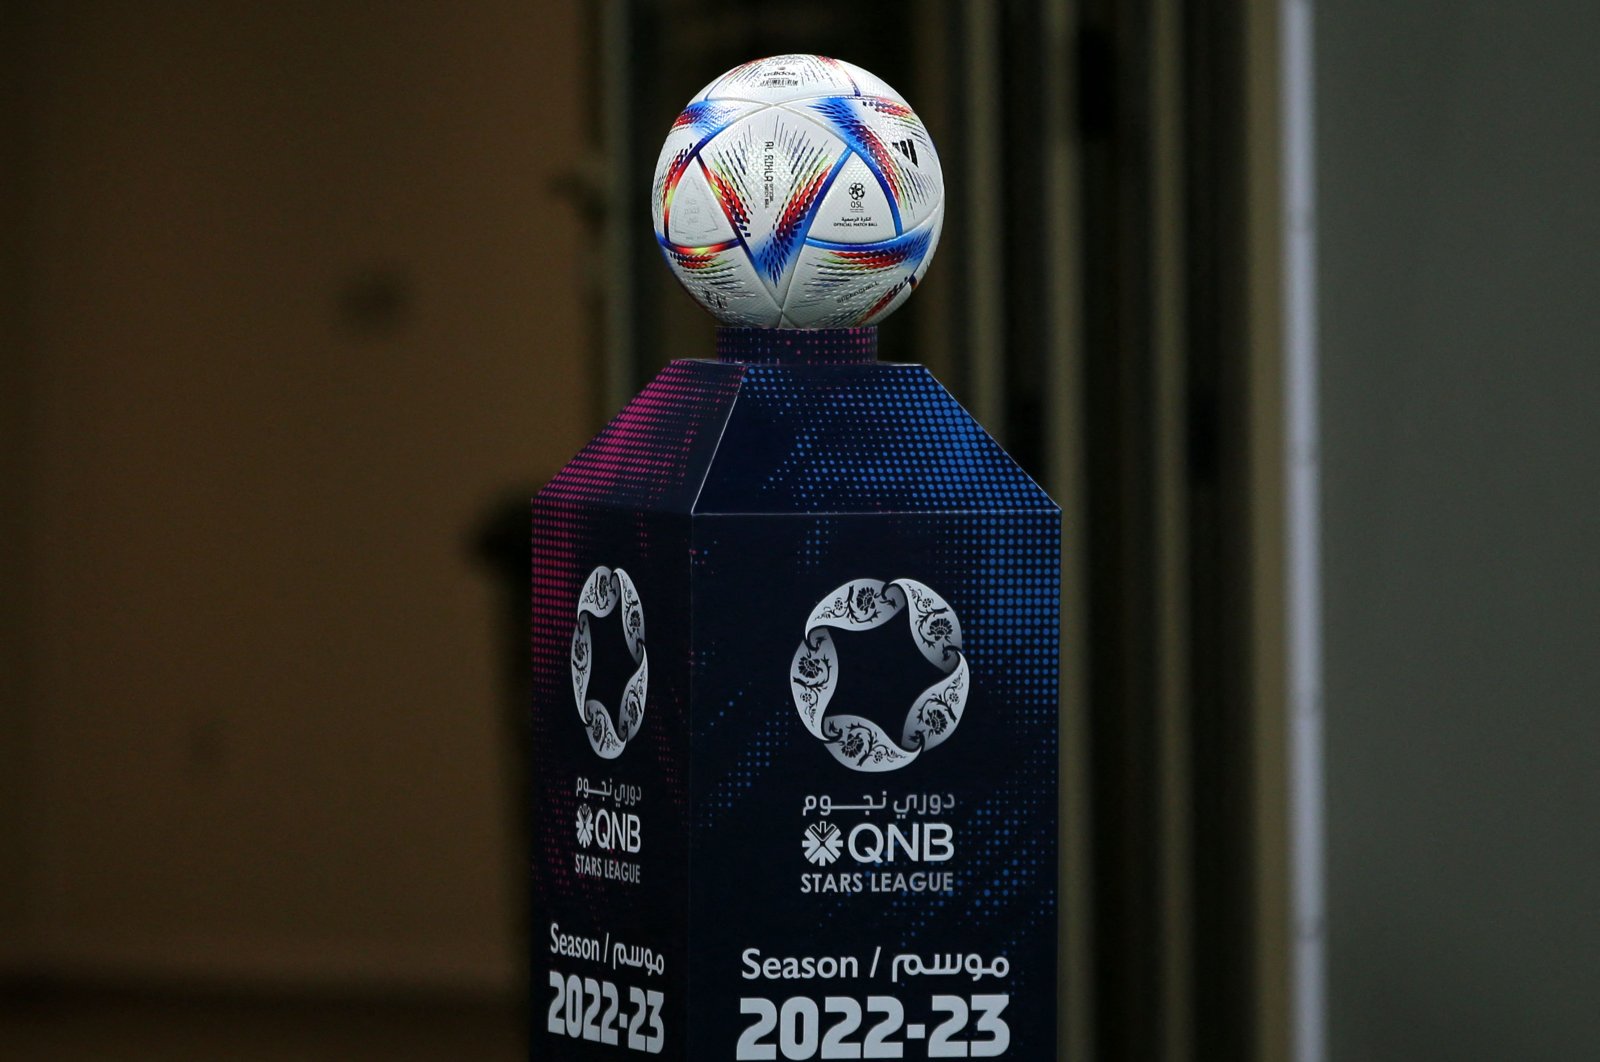 The FIFA World Cup ball is displayed before the Qatar Stars League match between Al-Arabi and Al-Rayyan at the Lusail stadium, on the outskirts of the capital Doha, Qatar, Aug. 11, 2022. (AFP Photo)